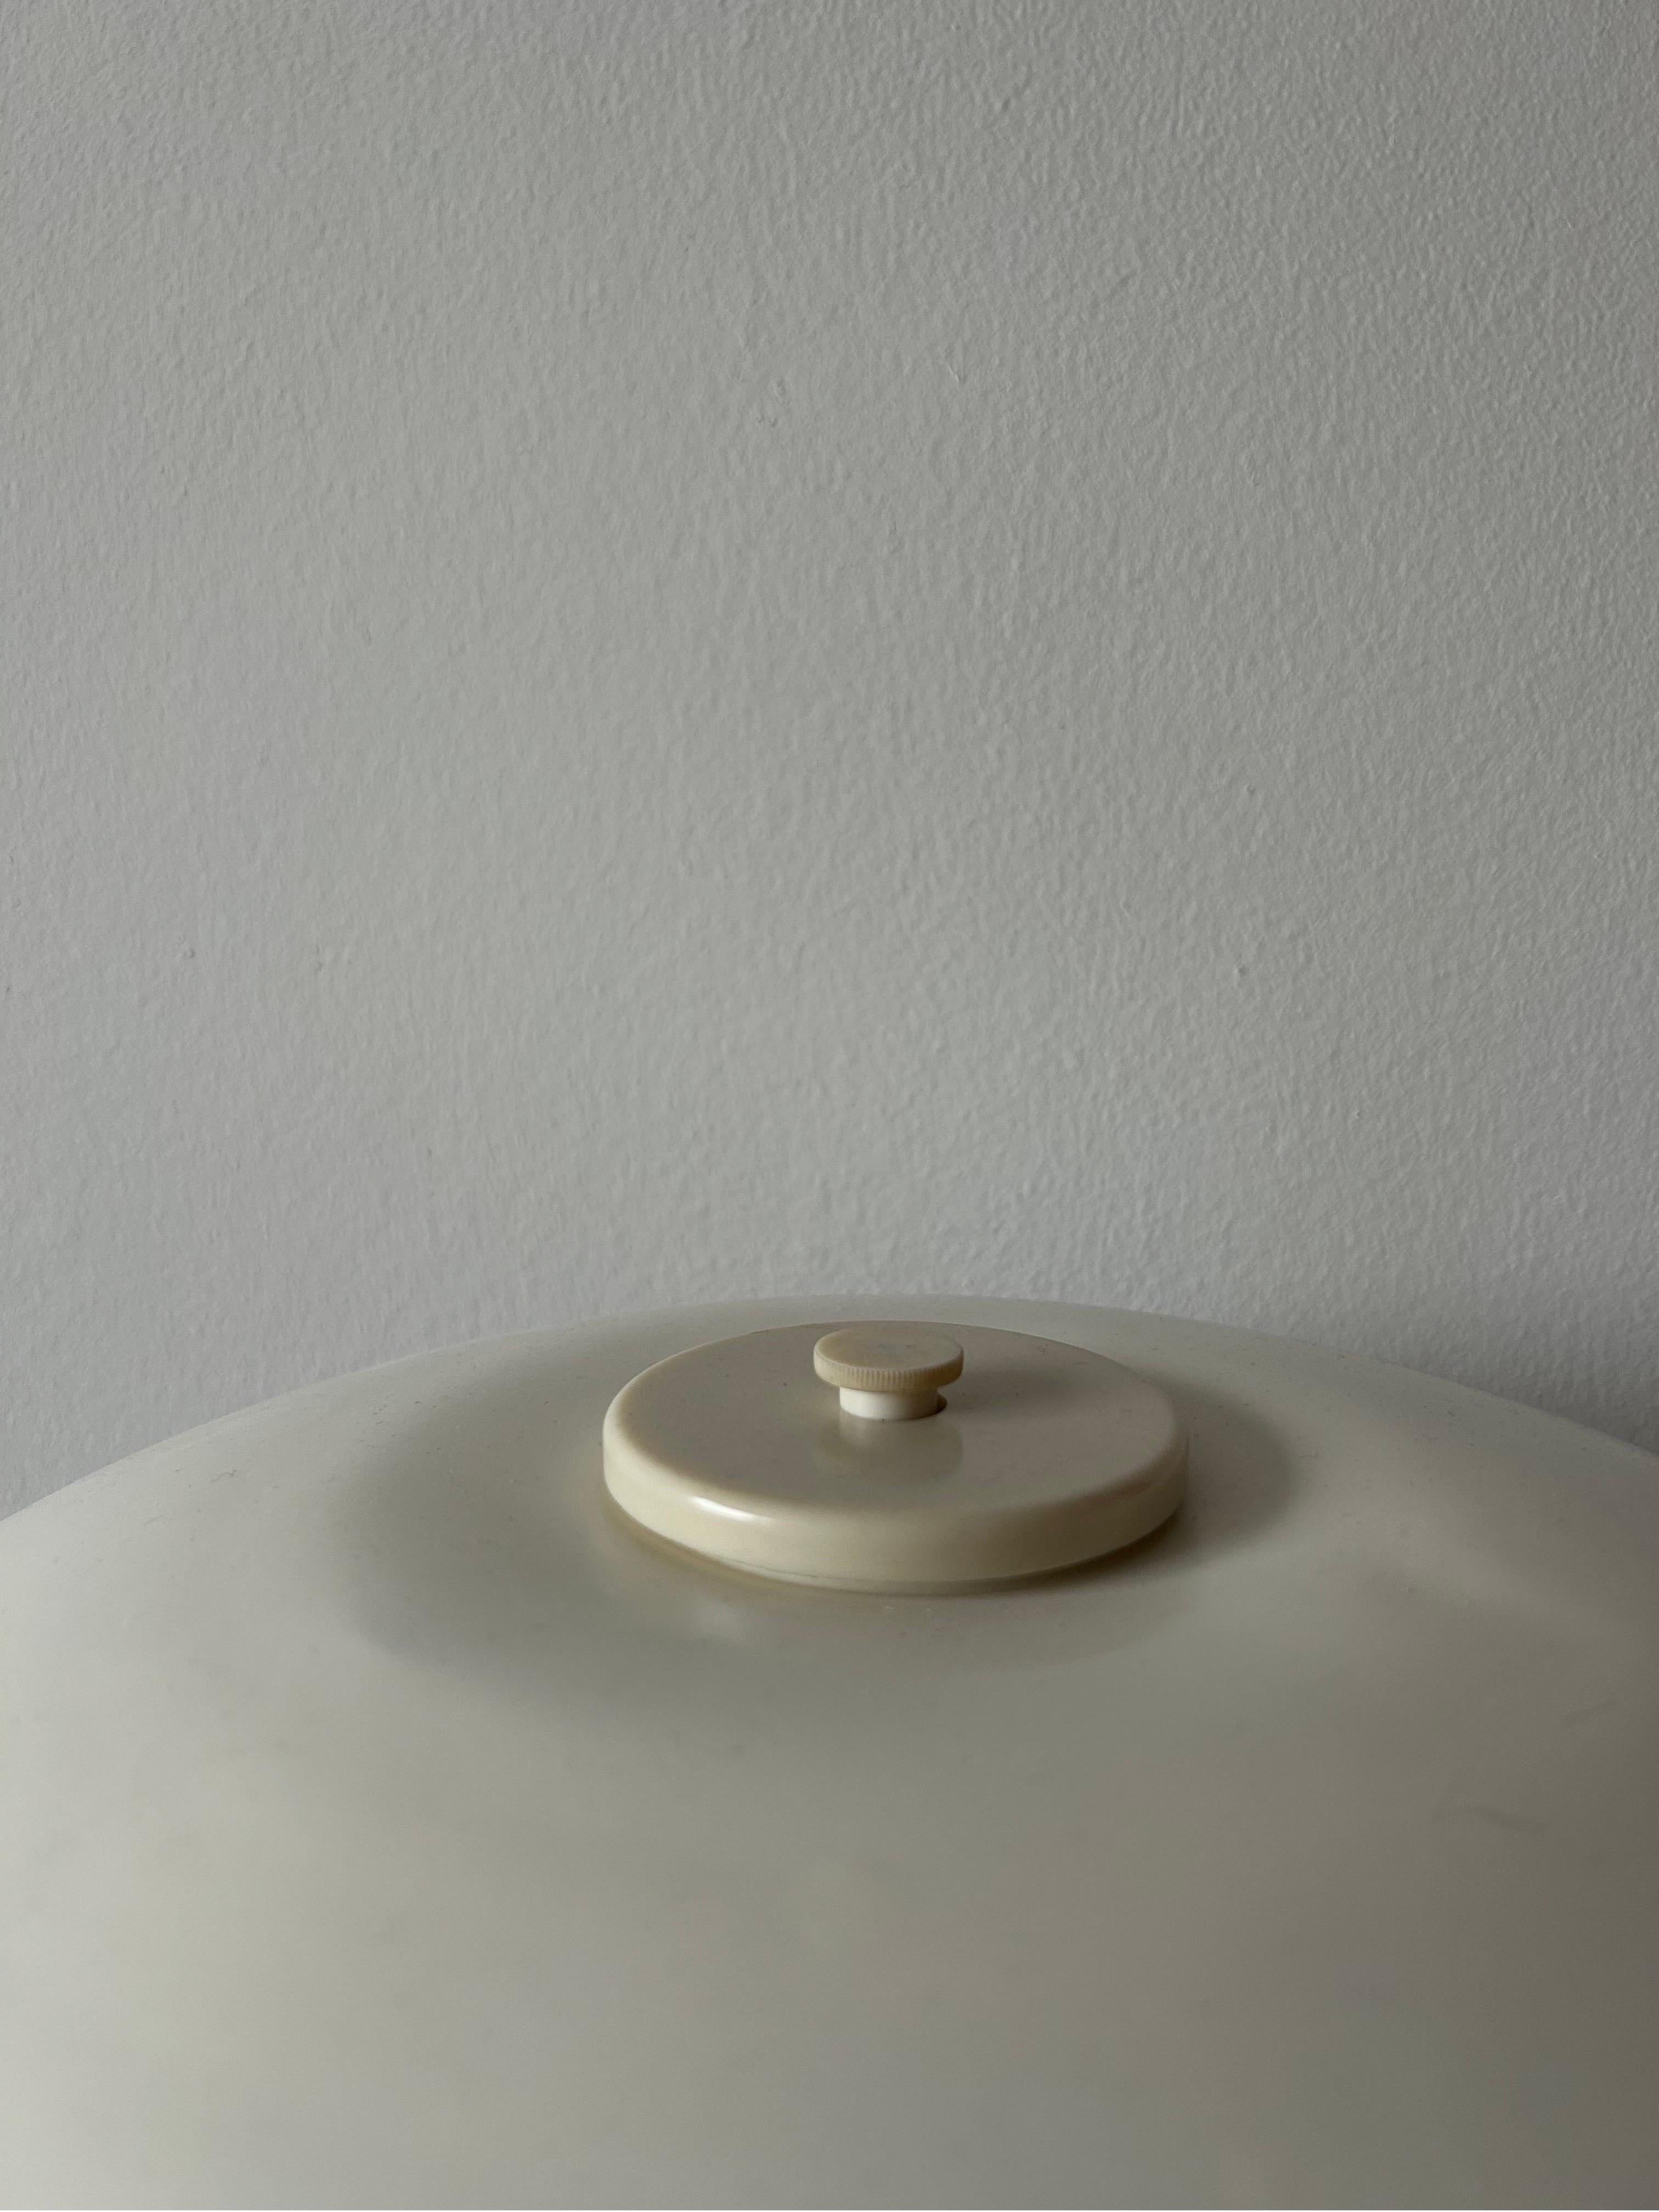 Mid-20th Century Poul Henningsen Table Lamp model 3/2, 5 manufactured by Louis Poulsen 1940’s  For Sale